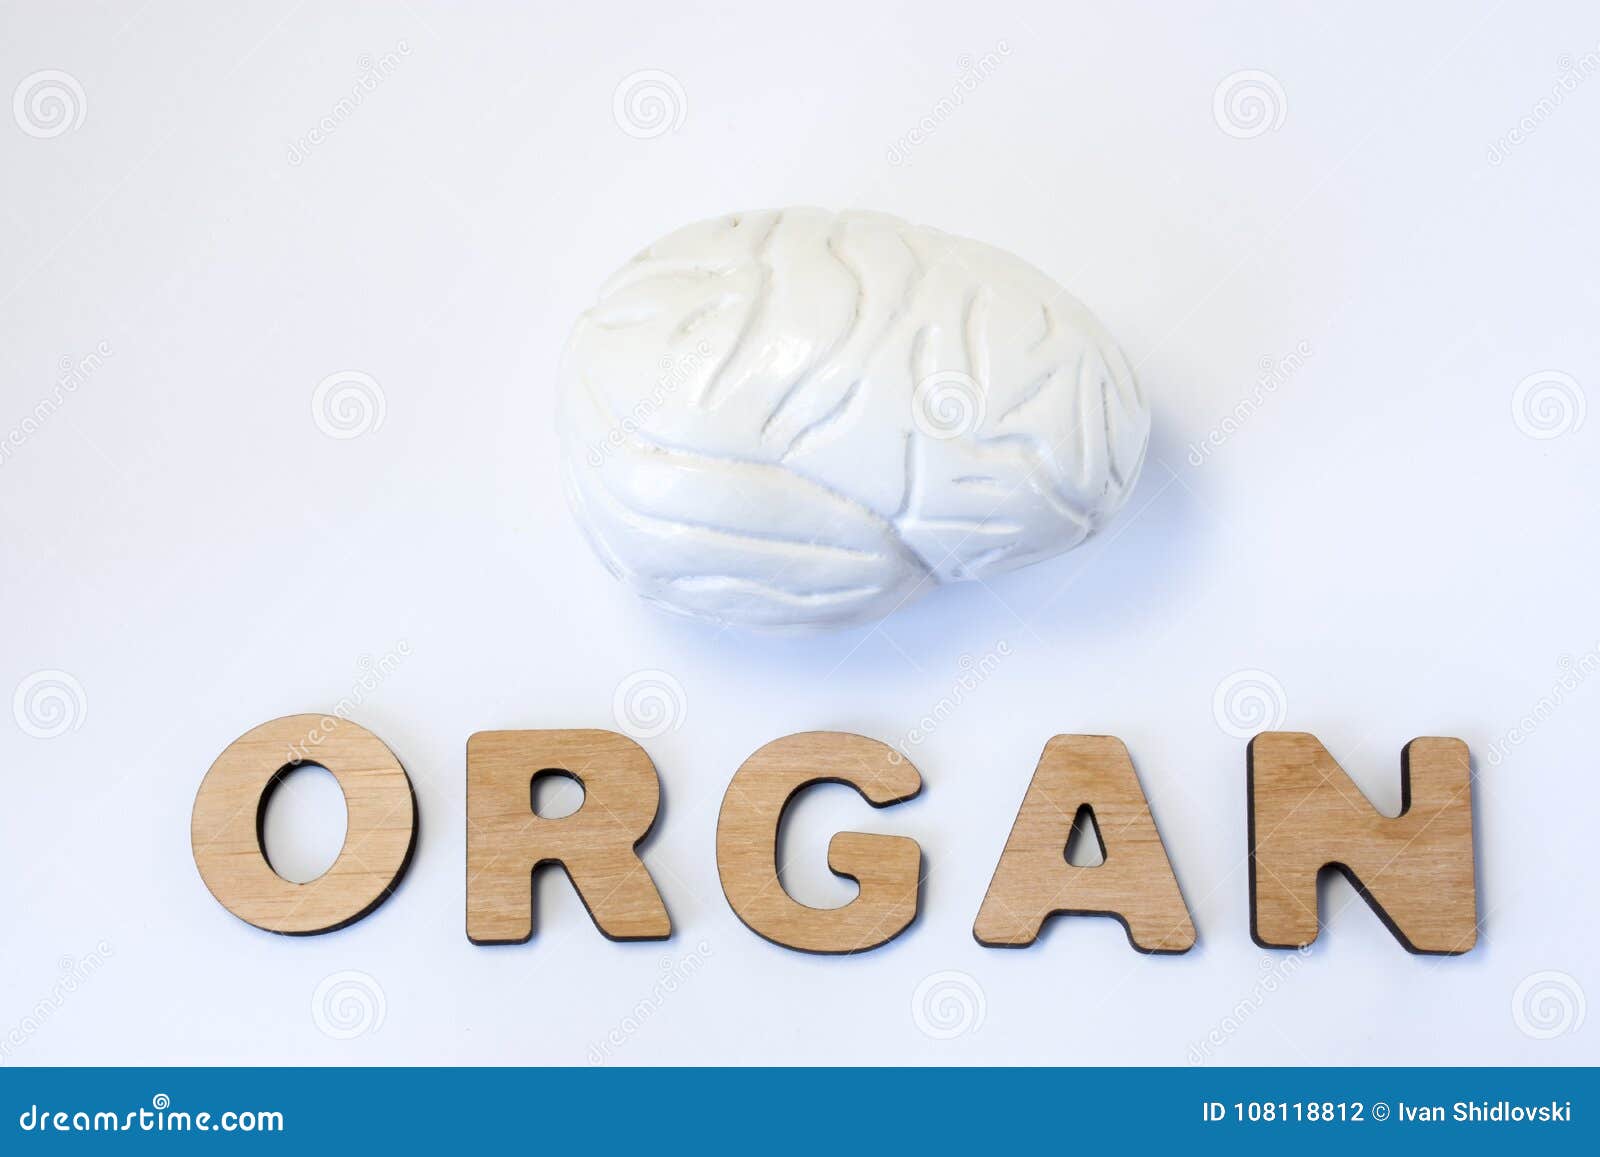 brain is organ of human or animal concept photo. model of brain is near volume letters composing word organ on light background. v